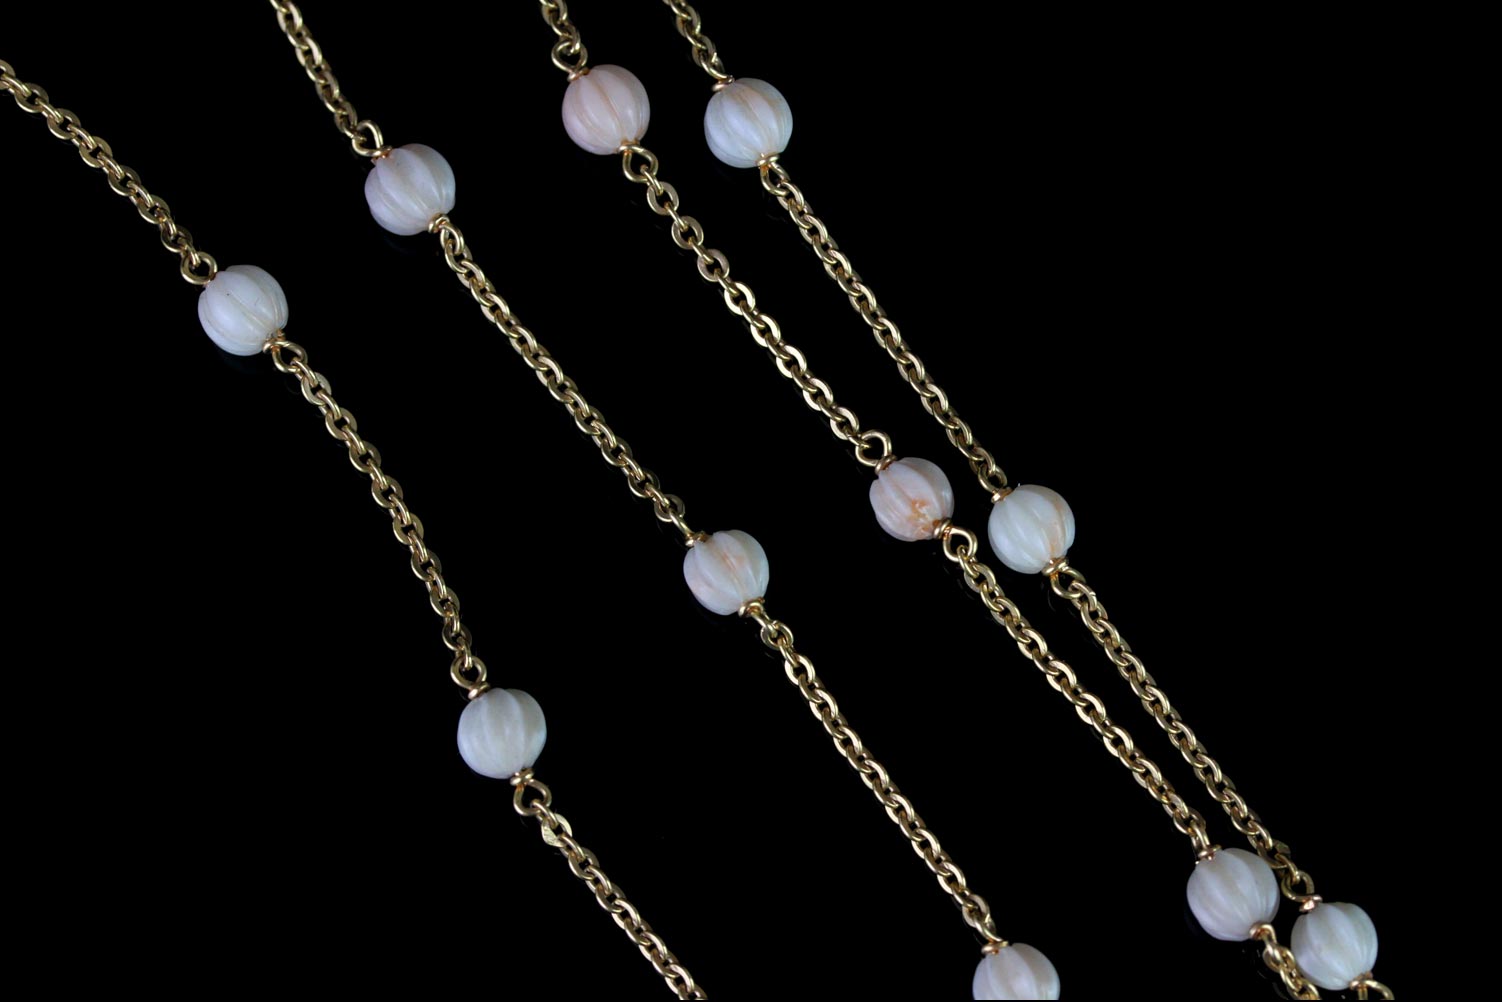 Carved coral bead necklace, 24 carved pale white/pink coral beads, gold belcher chain, stamped and